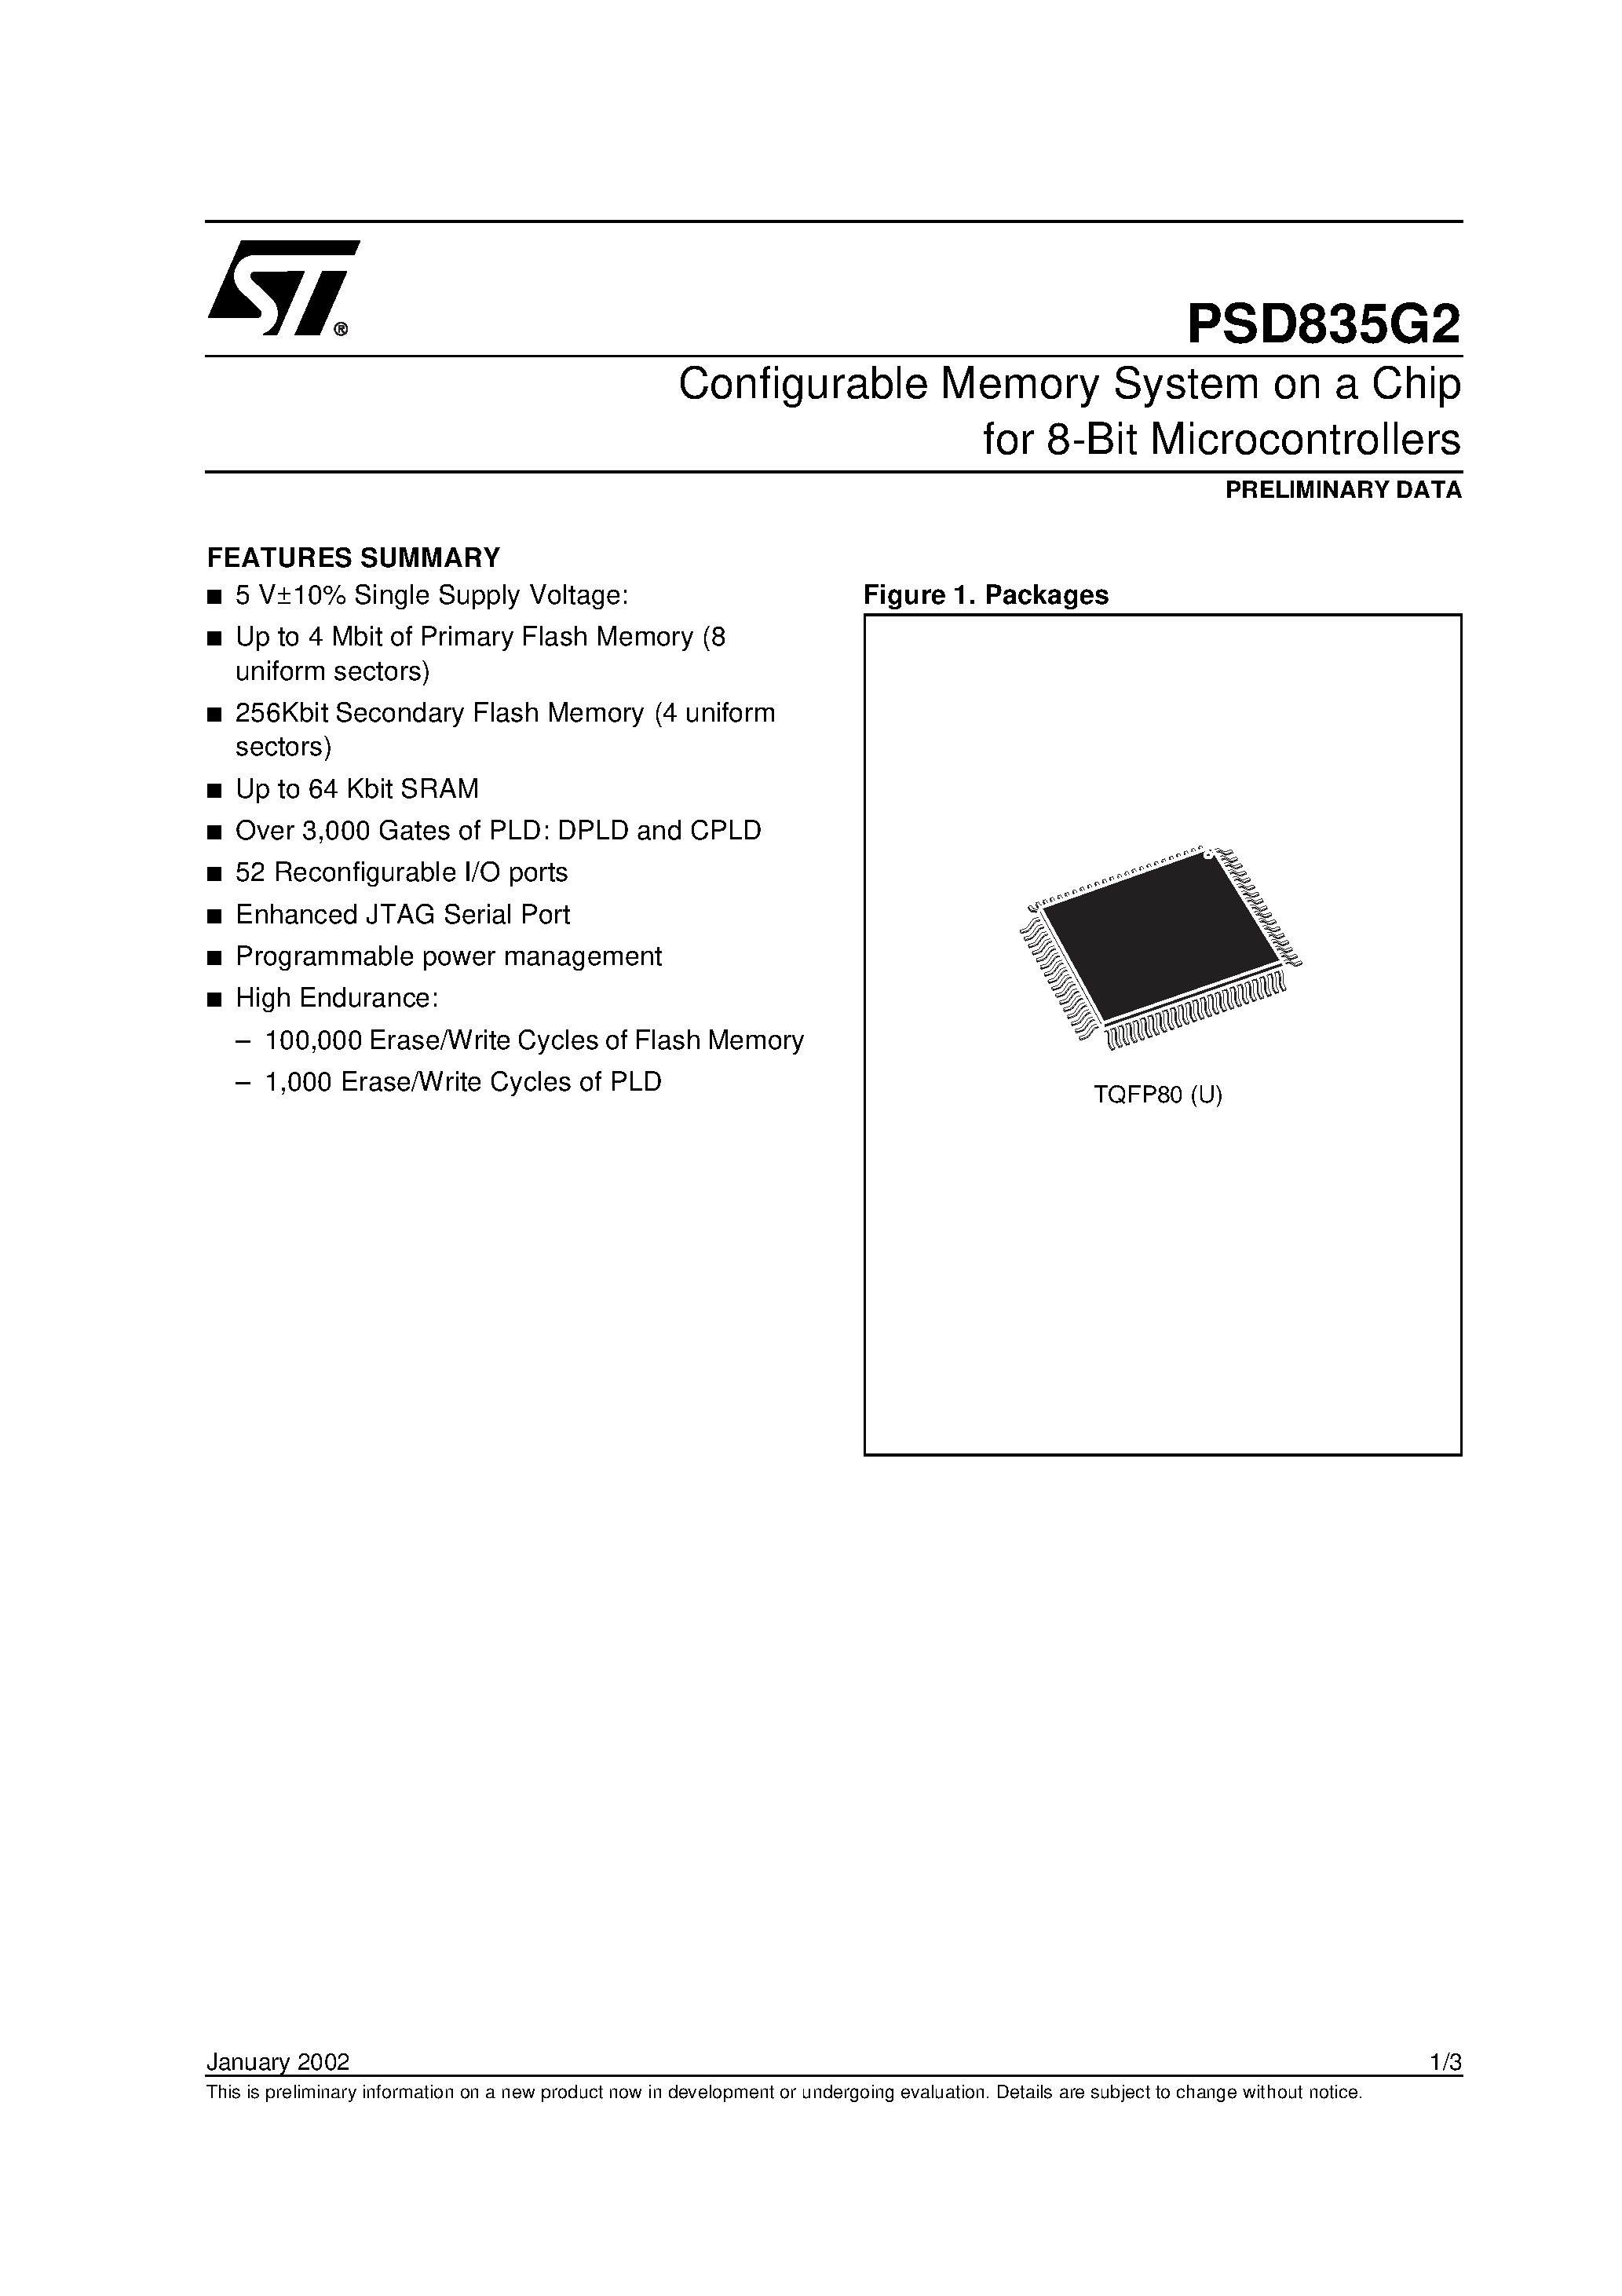 Datasheet PSD835F3-A-12JI - Configurable Memory System on a Chip for 8-Bit Microcontrollers page 1